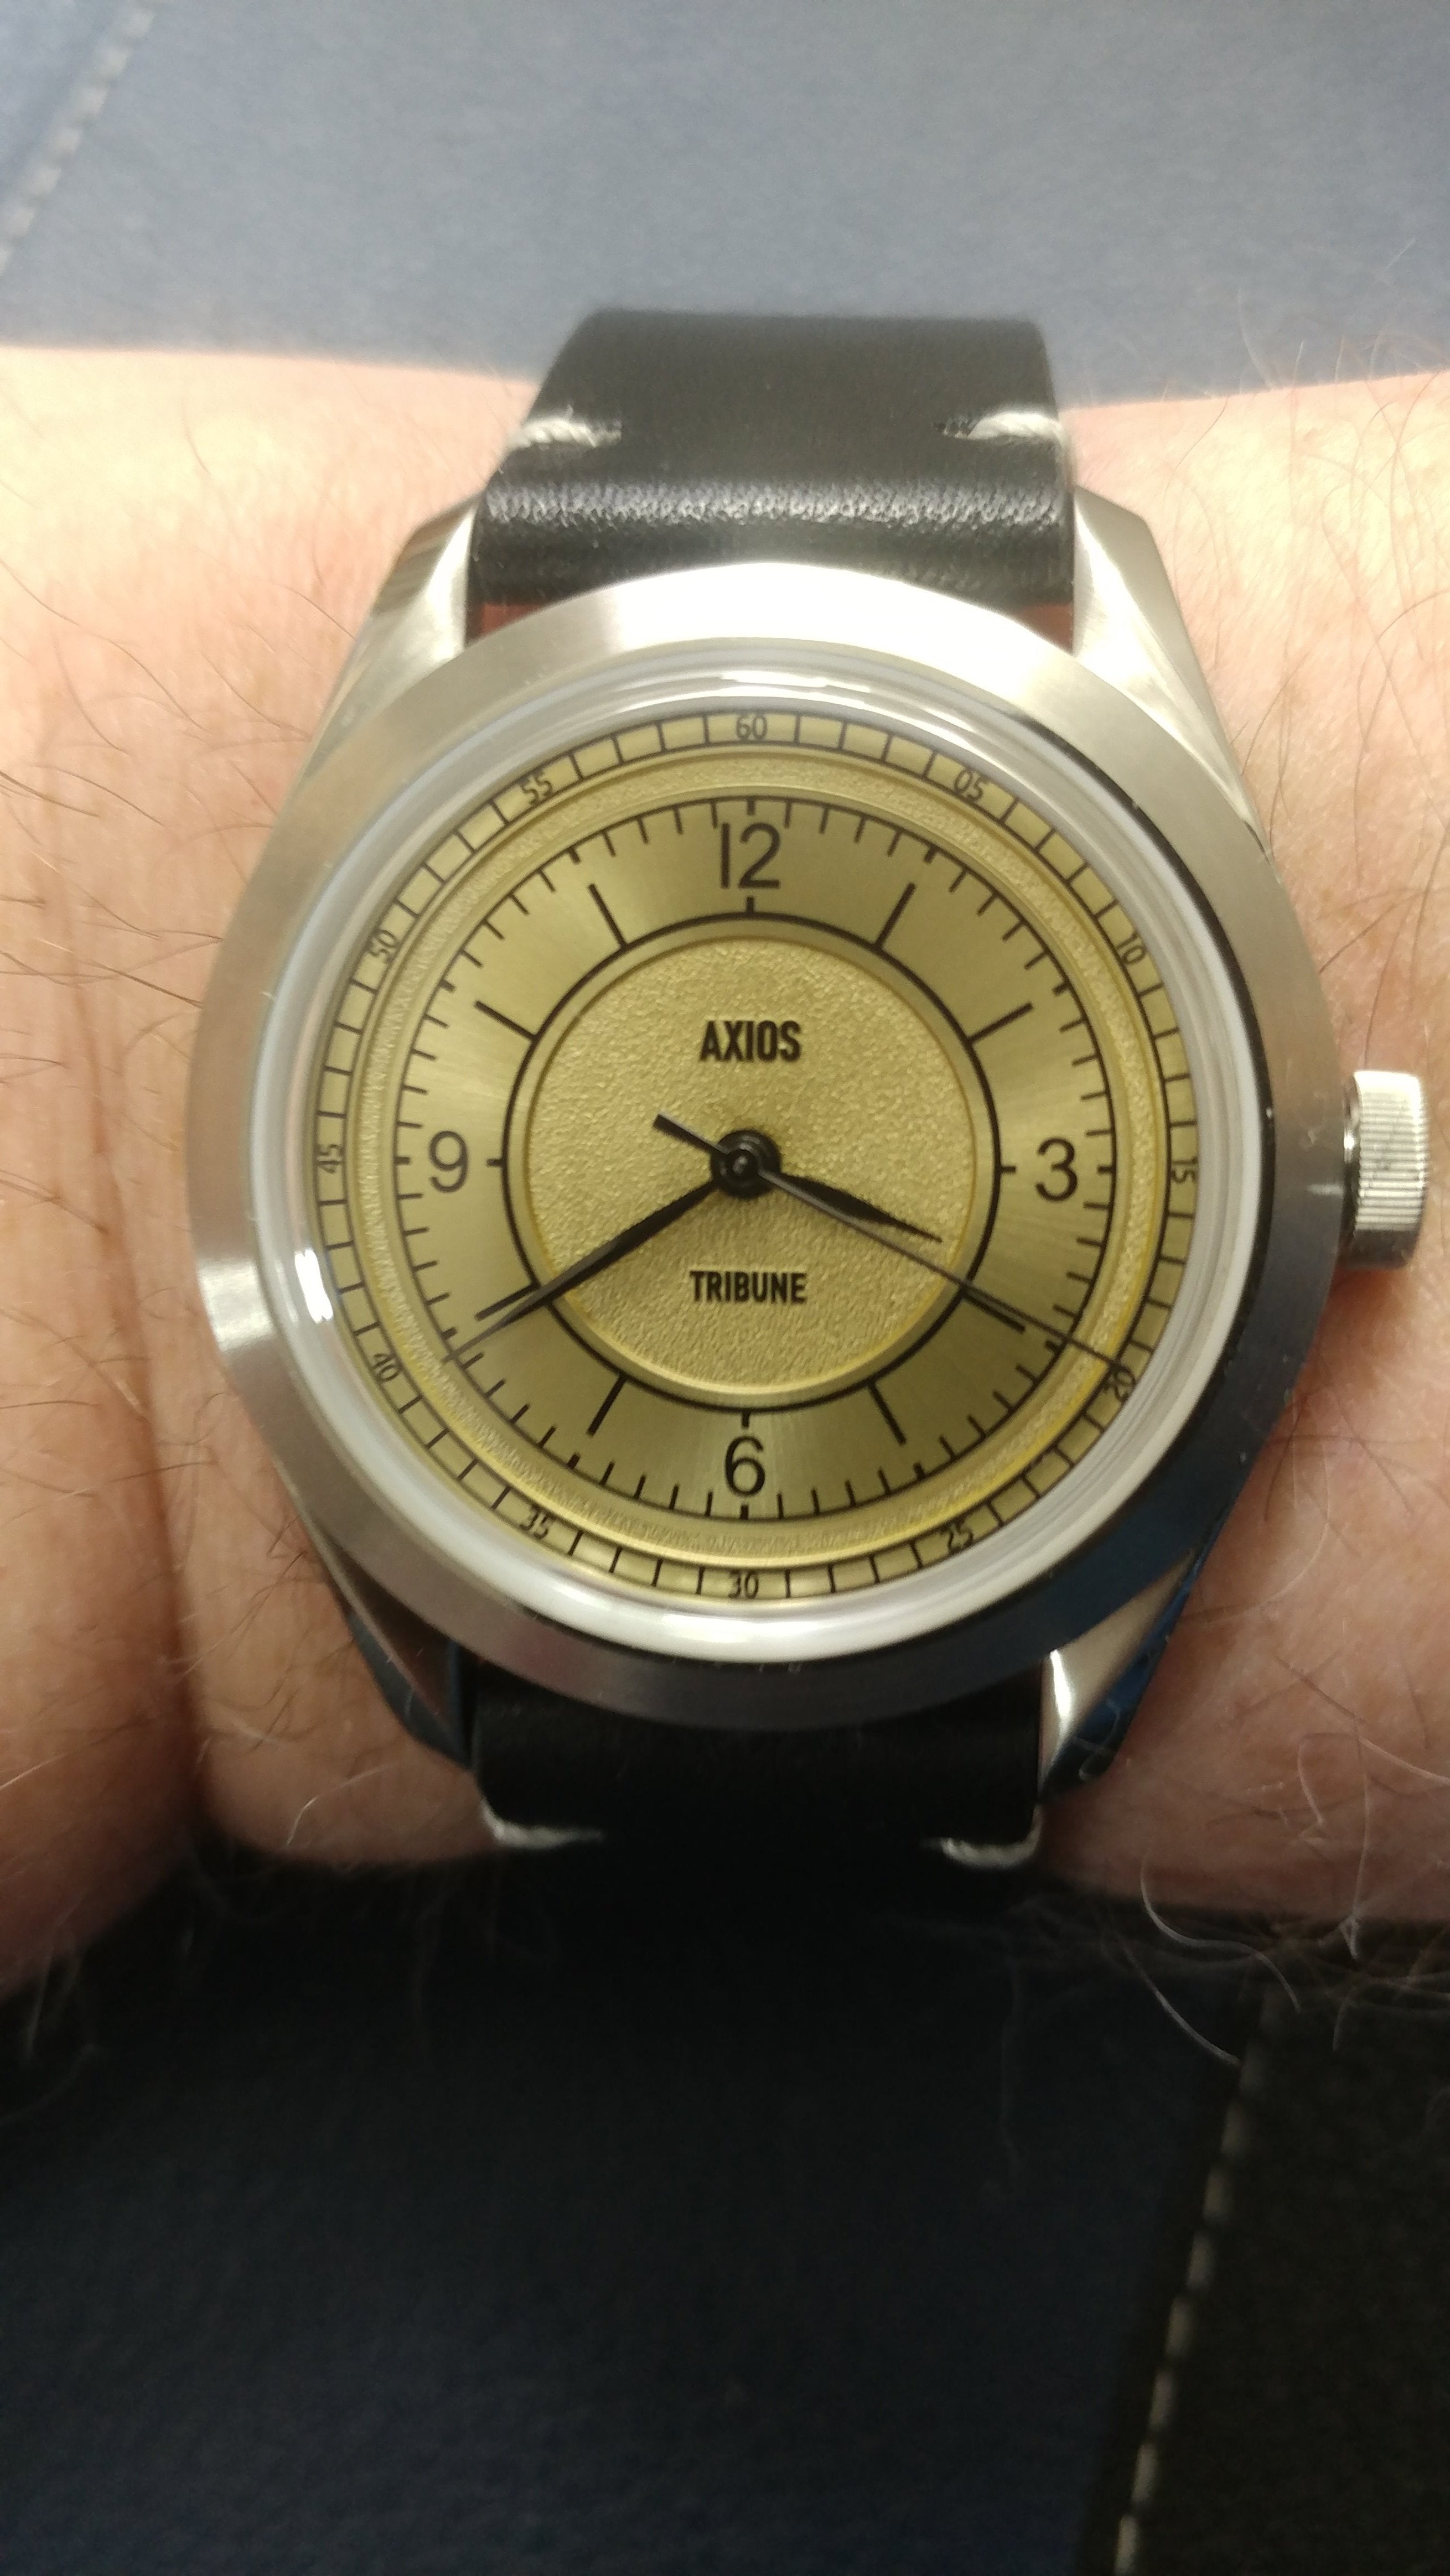 Axios Tribune: First Thoughts -- Pretty Nice | WatchUSeek Watch Forums